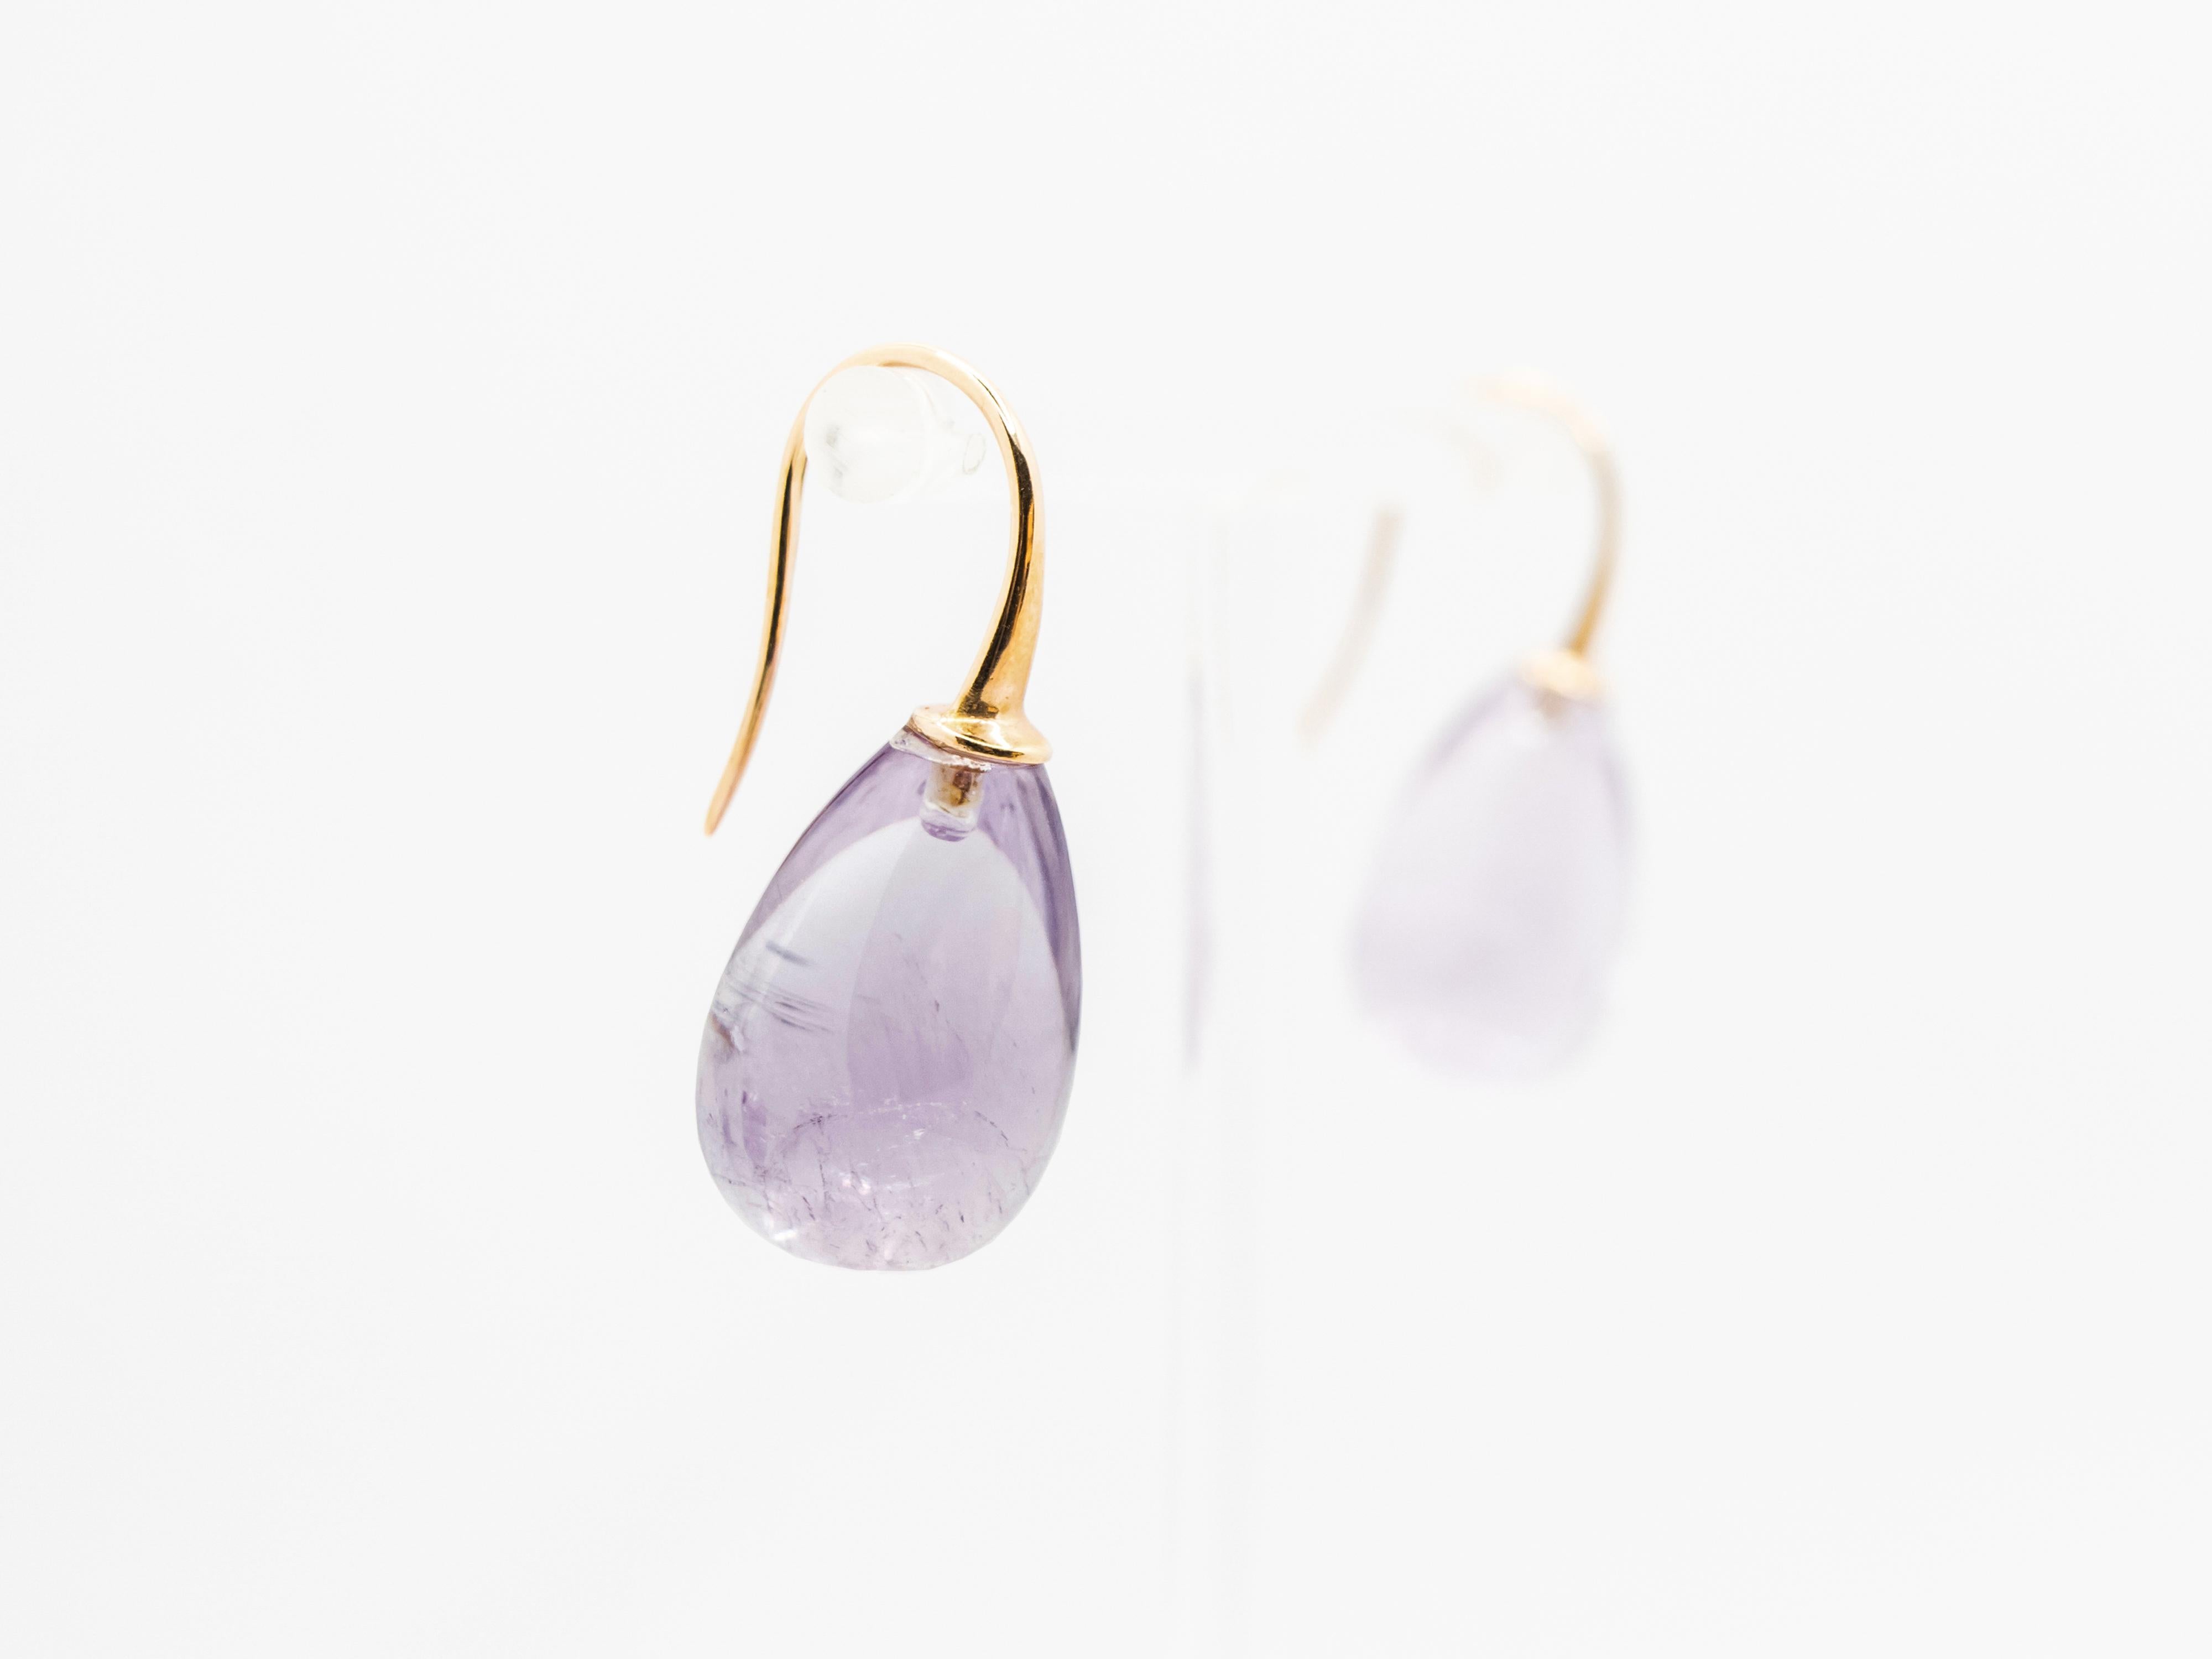 A very bright and contemporary earrings.
The natural Amethyst has a light purple color and its natural inclusions give the stone a beautiful flare.
The drop design of these earrings matches very well every face shape.
Total weigh is gr. 13.25
Length